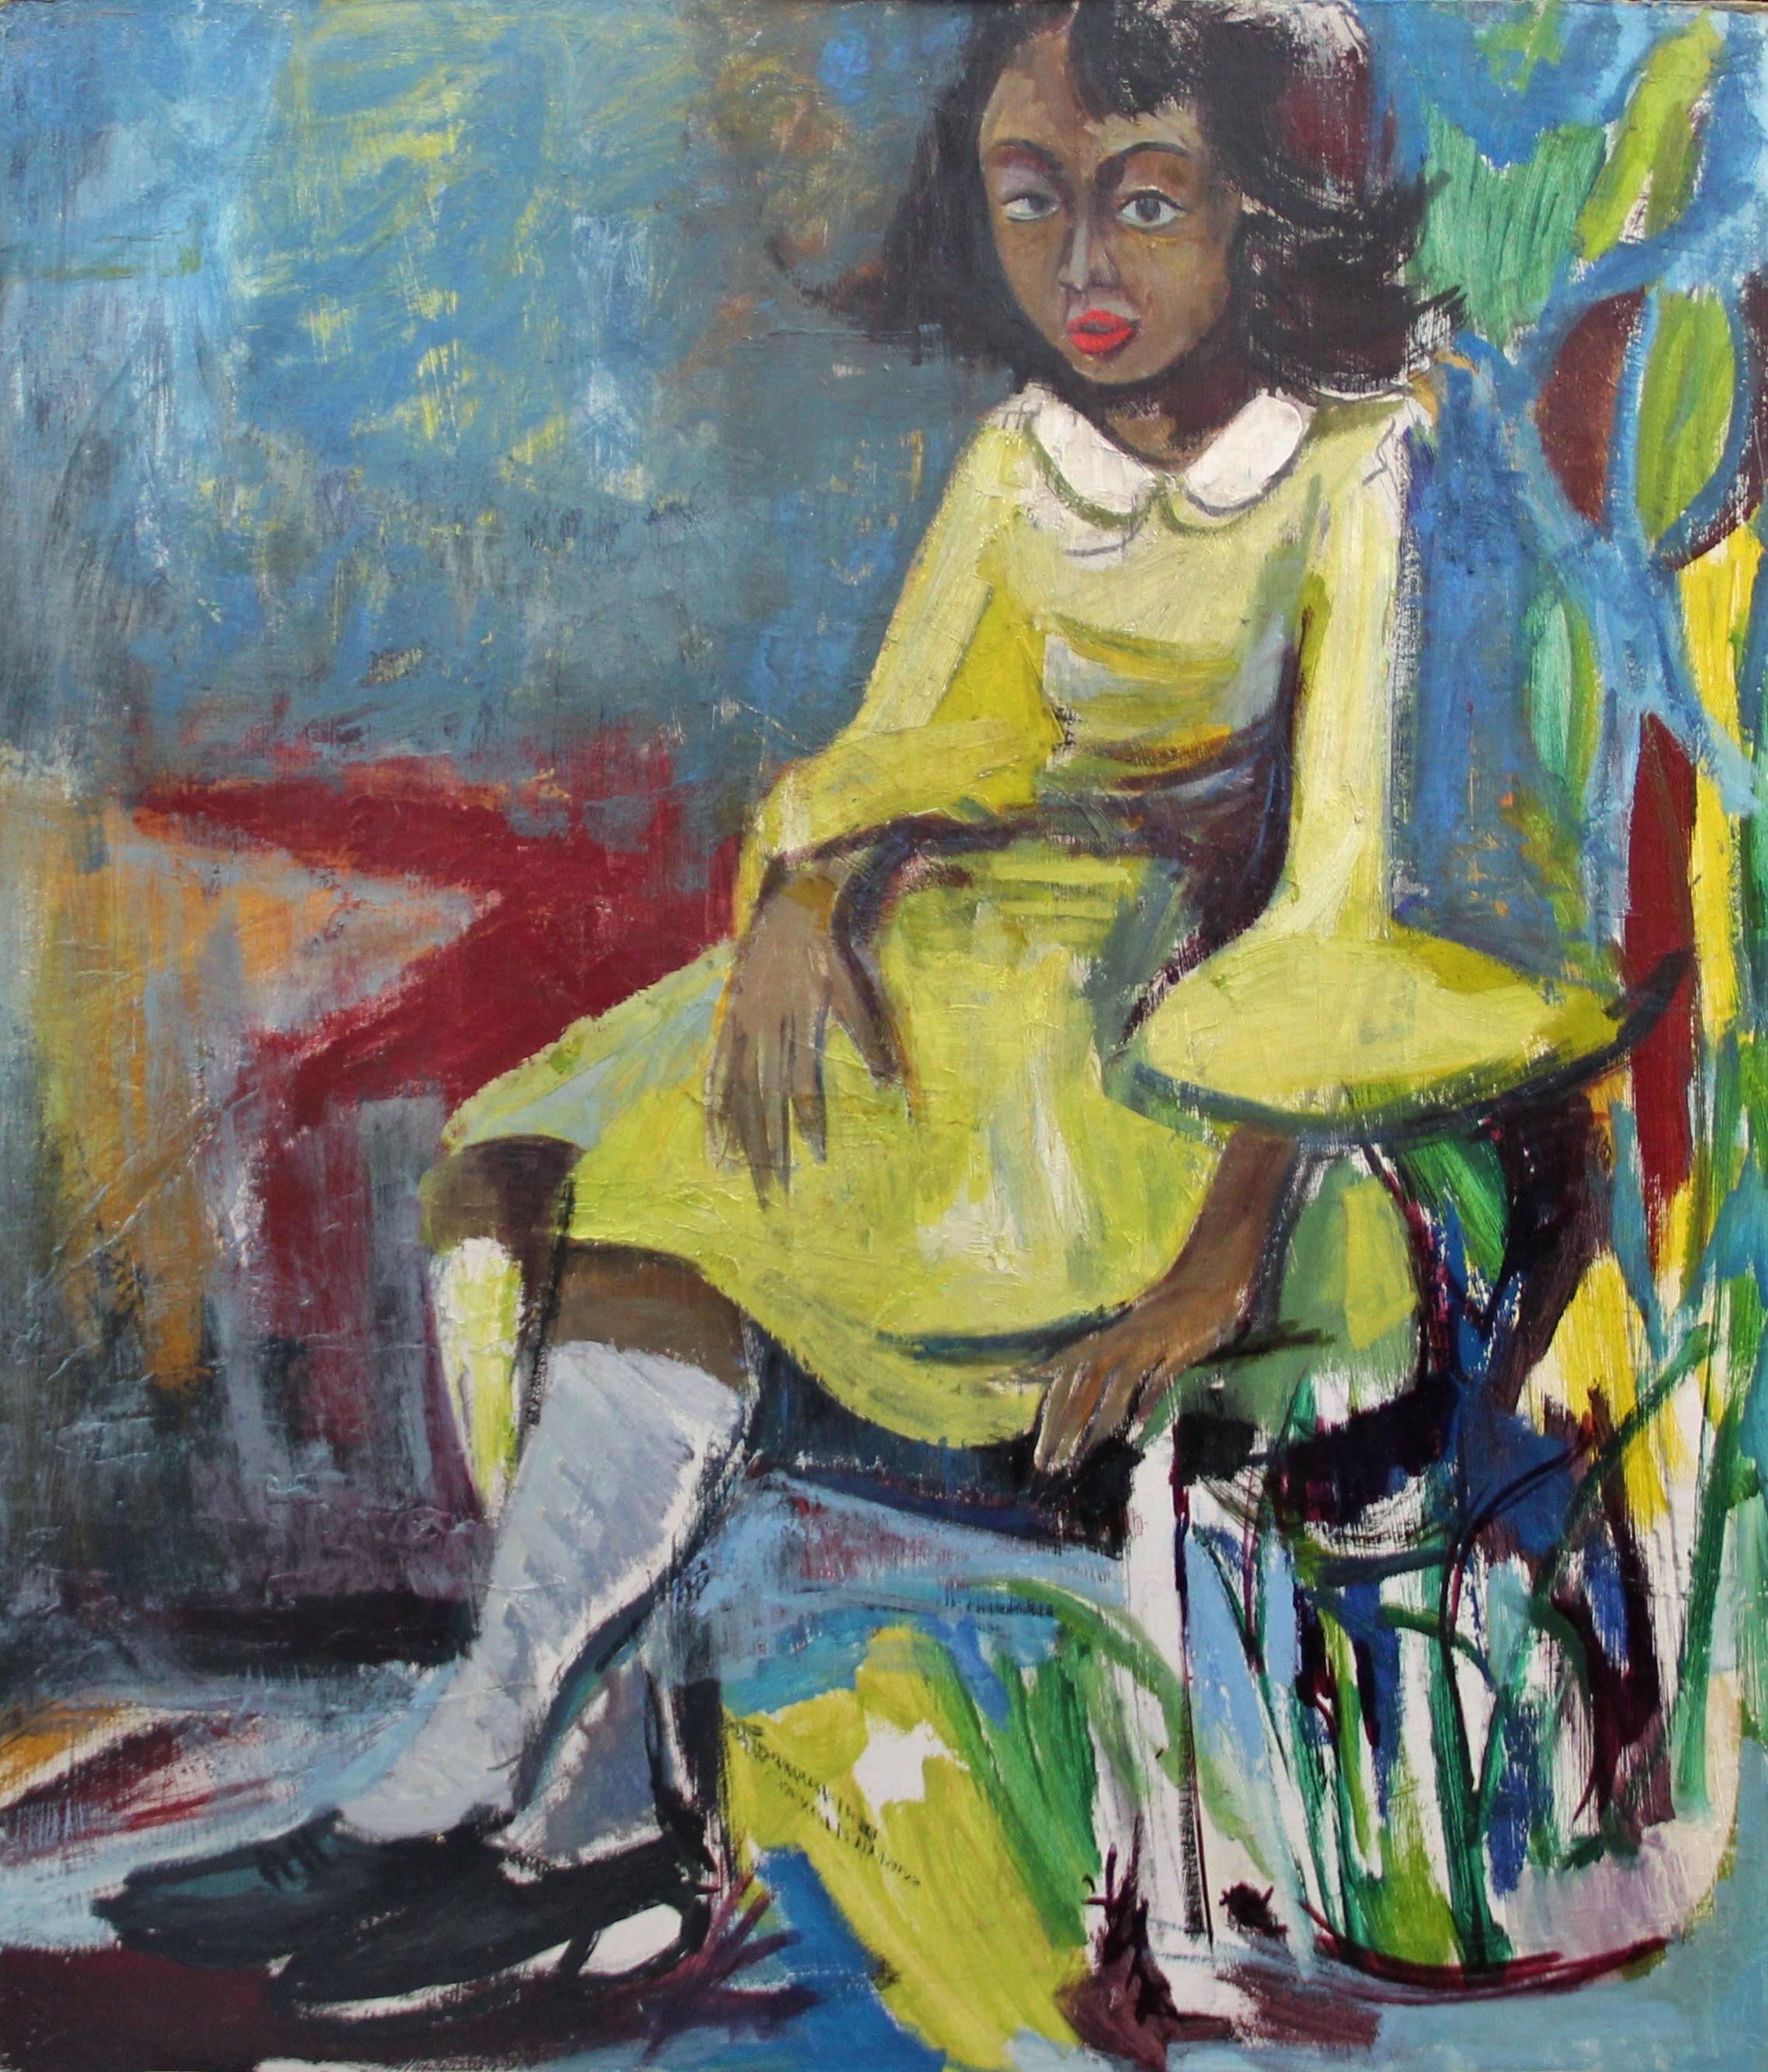 Bernard Harmon, Girl in a Yellow Dress, is an oil painting on board, the artwork is 39.75" x 34" in size plus a 3" gold frame. 
"Girl in a Yellow Dress" comes from a private collection in Bucks County, Pennsylvania. The colors in his work are